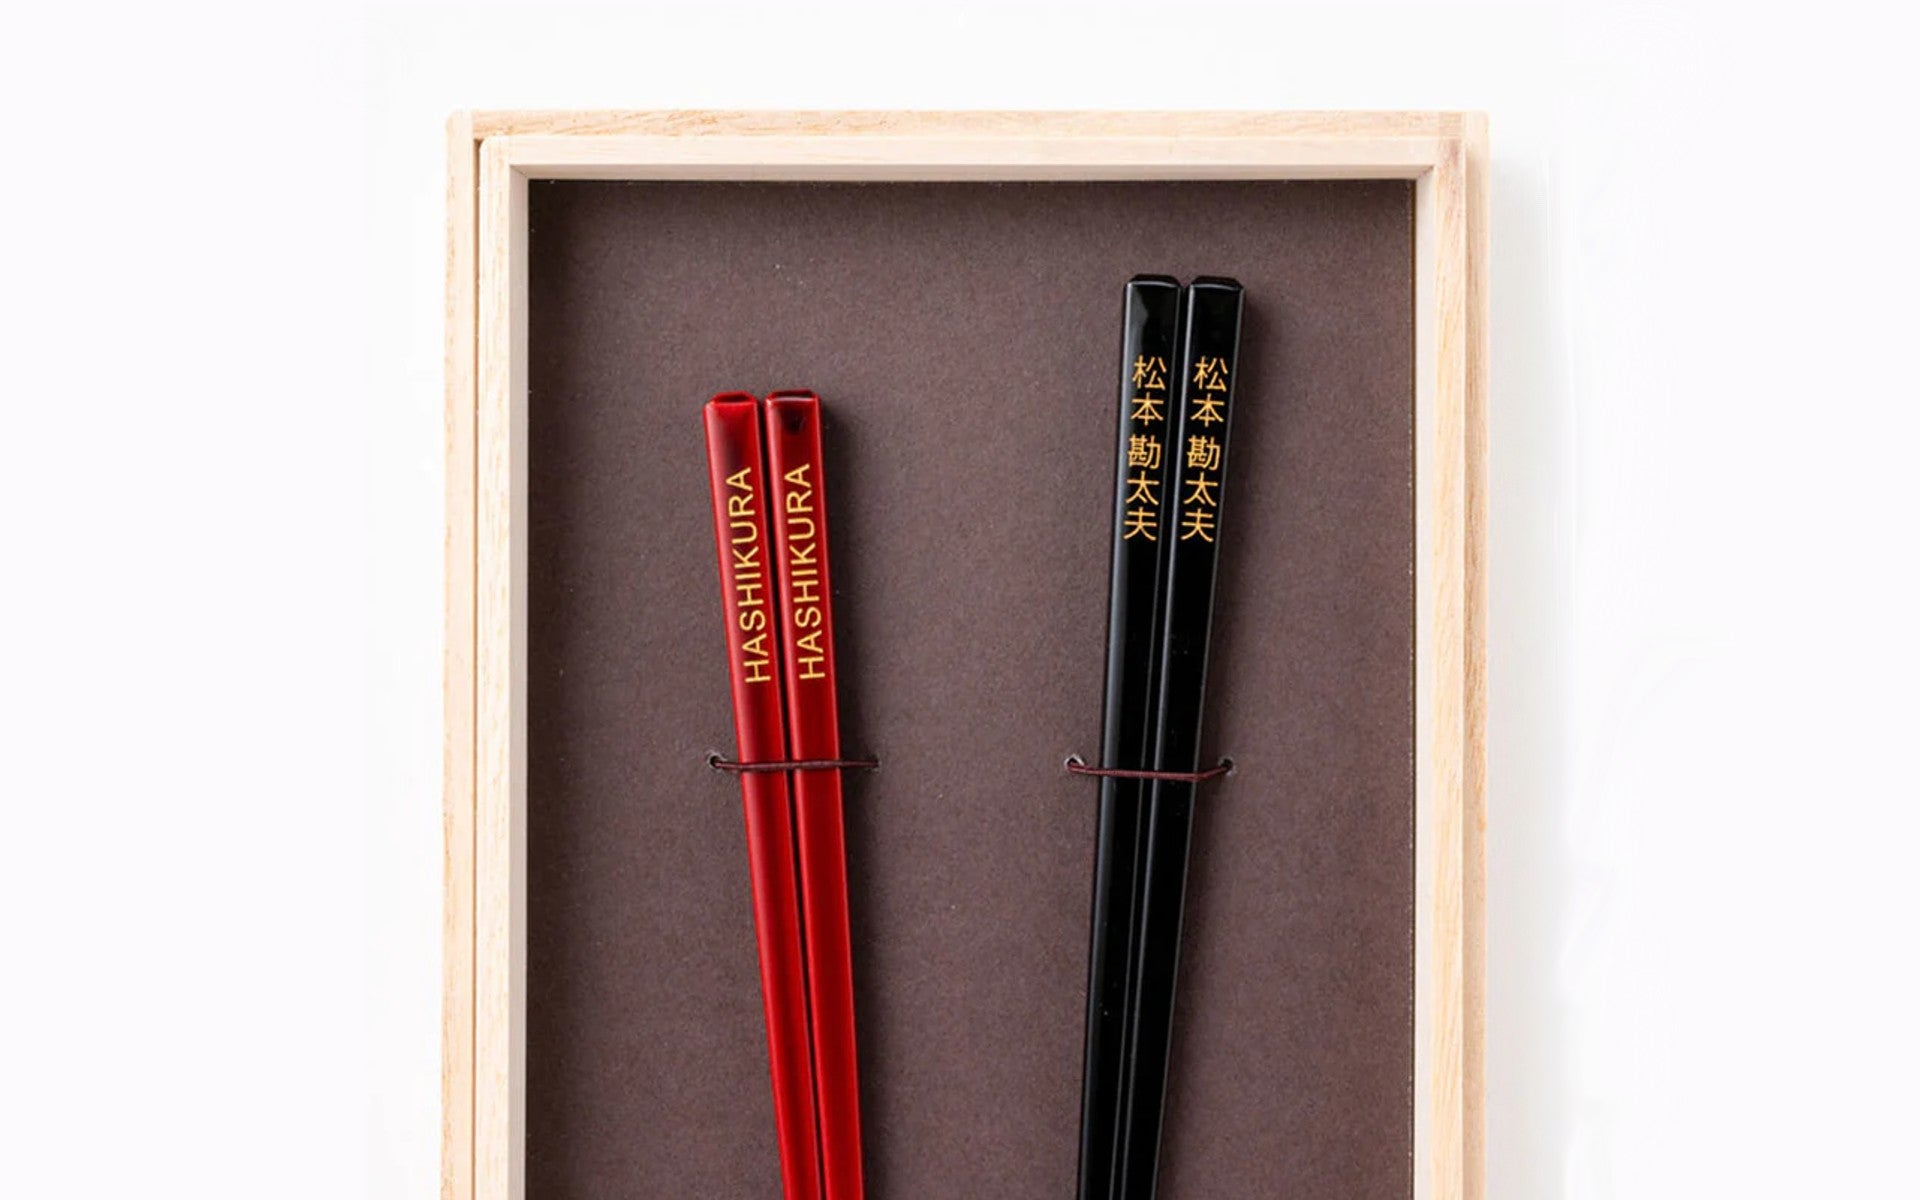 Personalized and engraved Chinese chopsticks made from dark hard